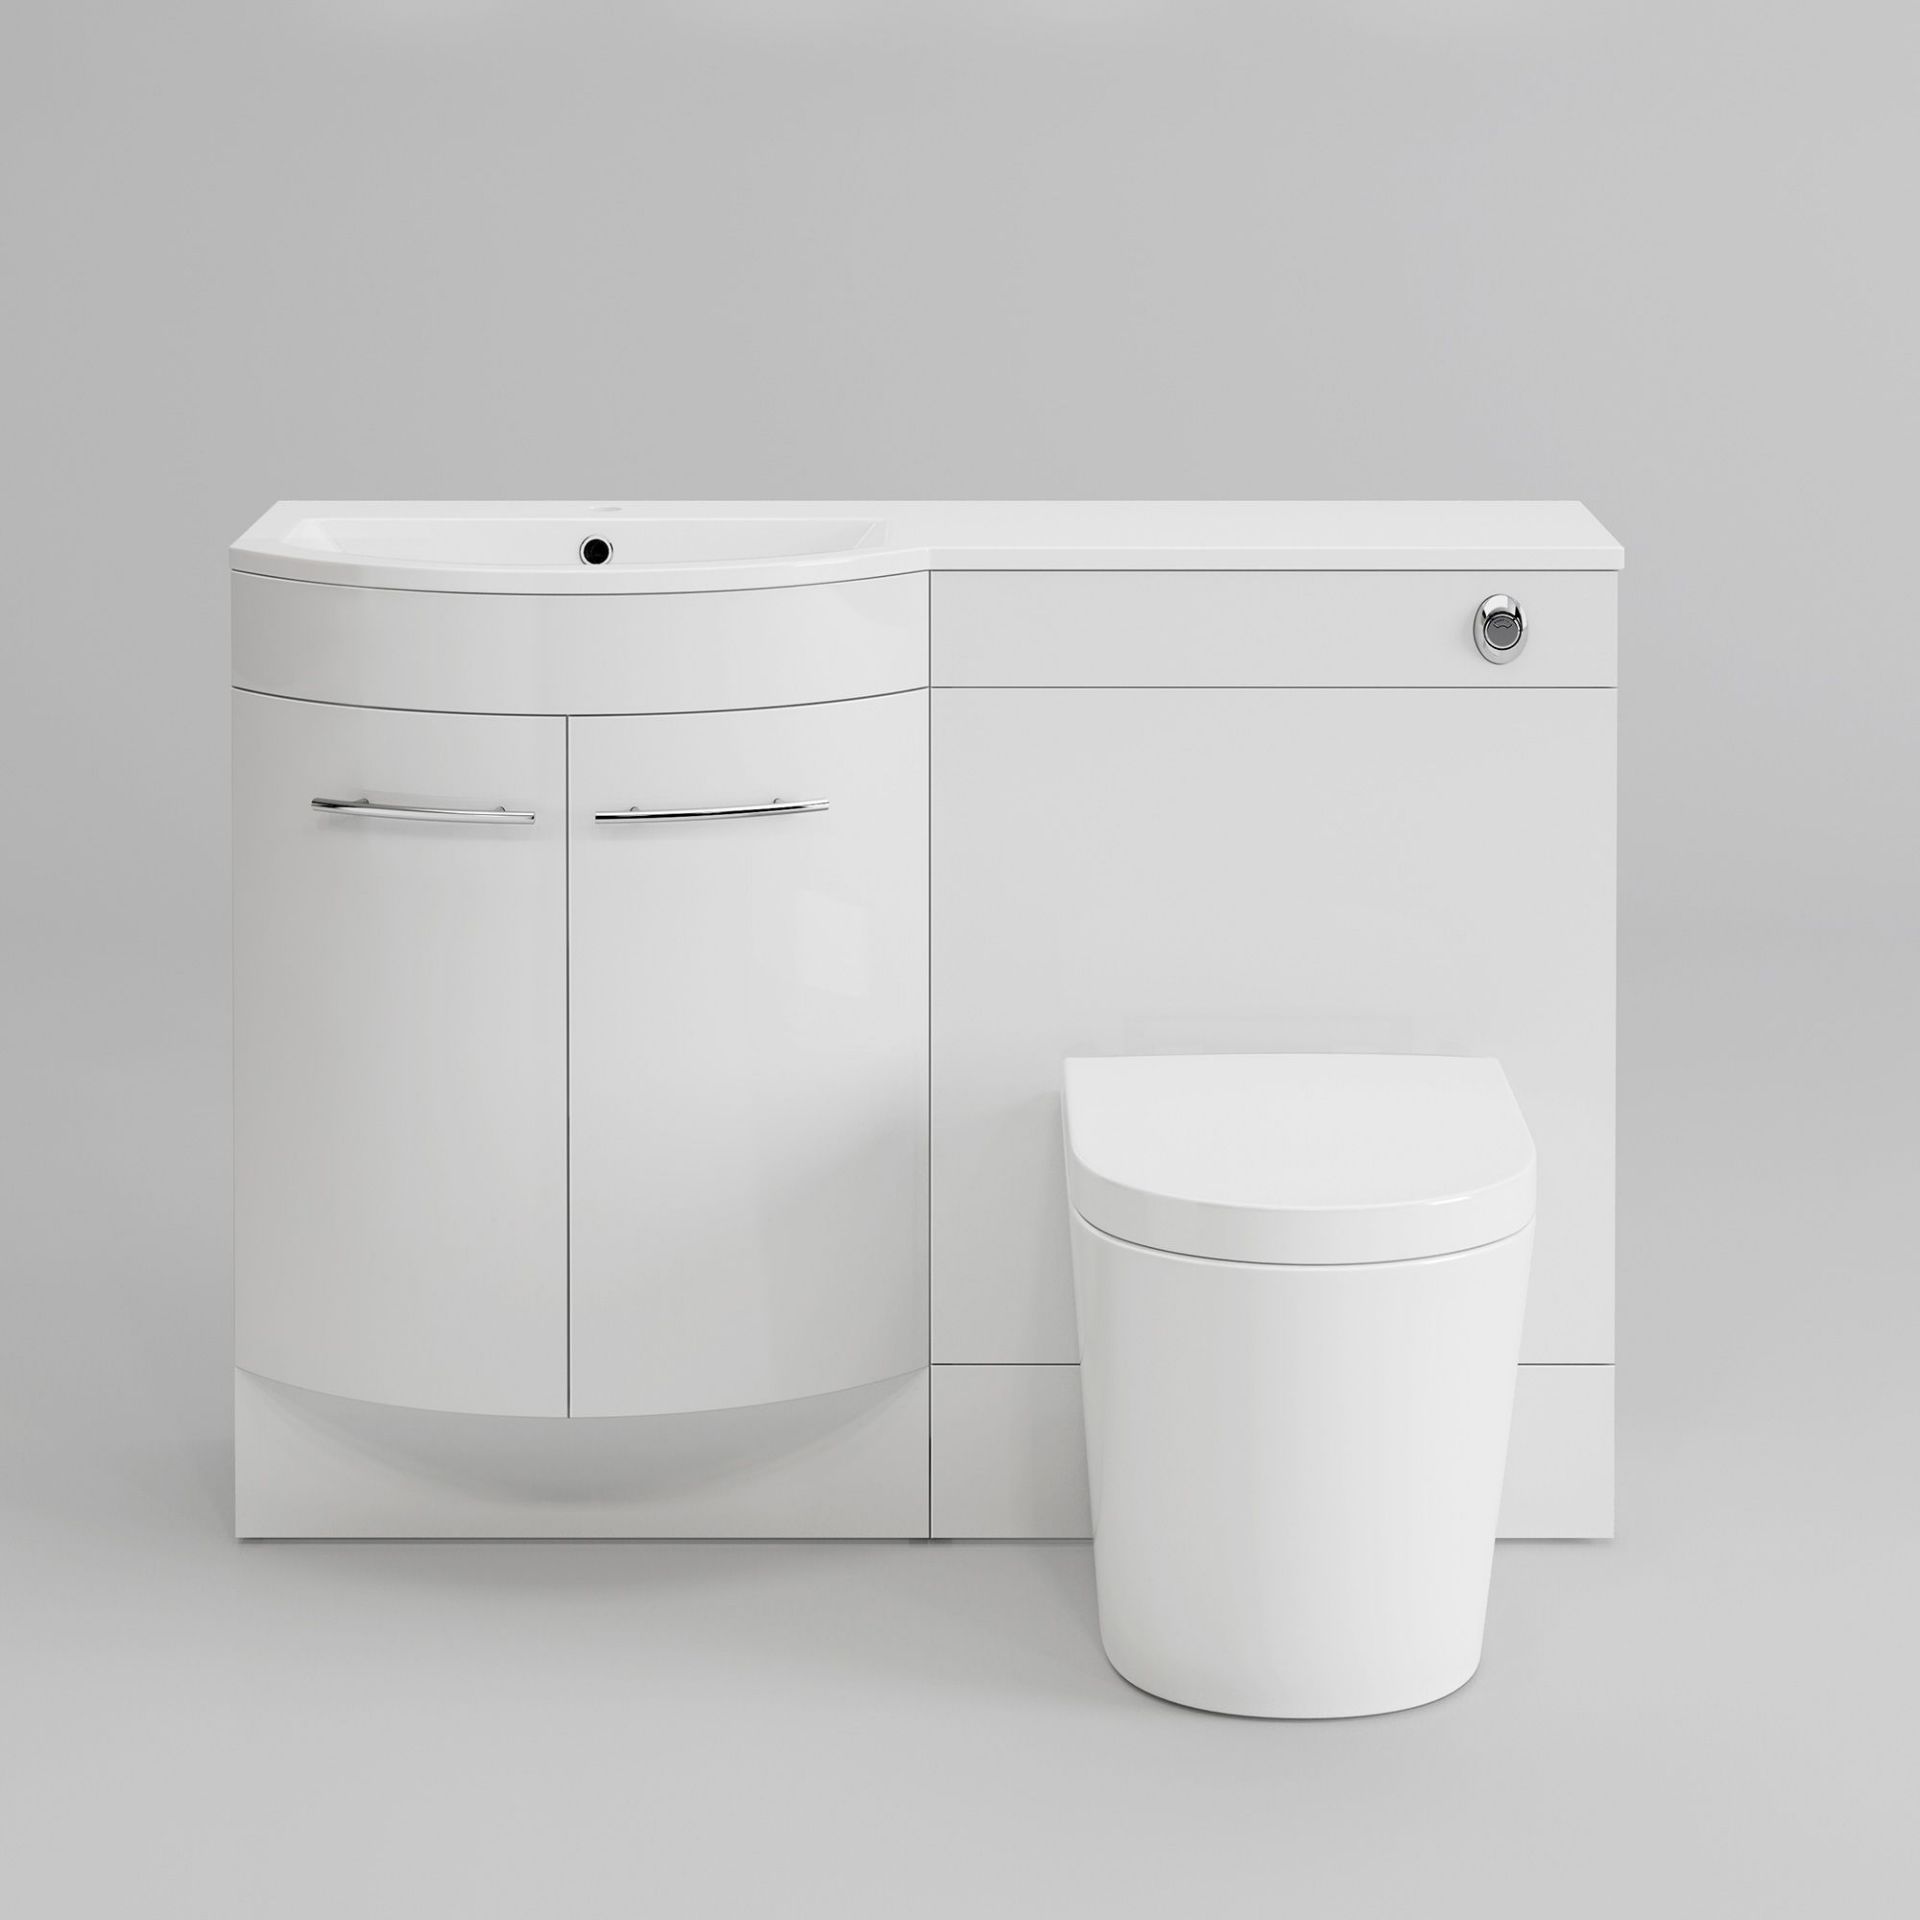 New Boxed 1200mm Alexis White Gloss Left Hand Vanity Unit , Florence Pan. RRP £999.99.Contempo... - Image 2 of 2